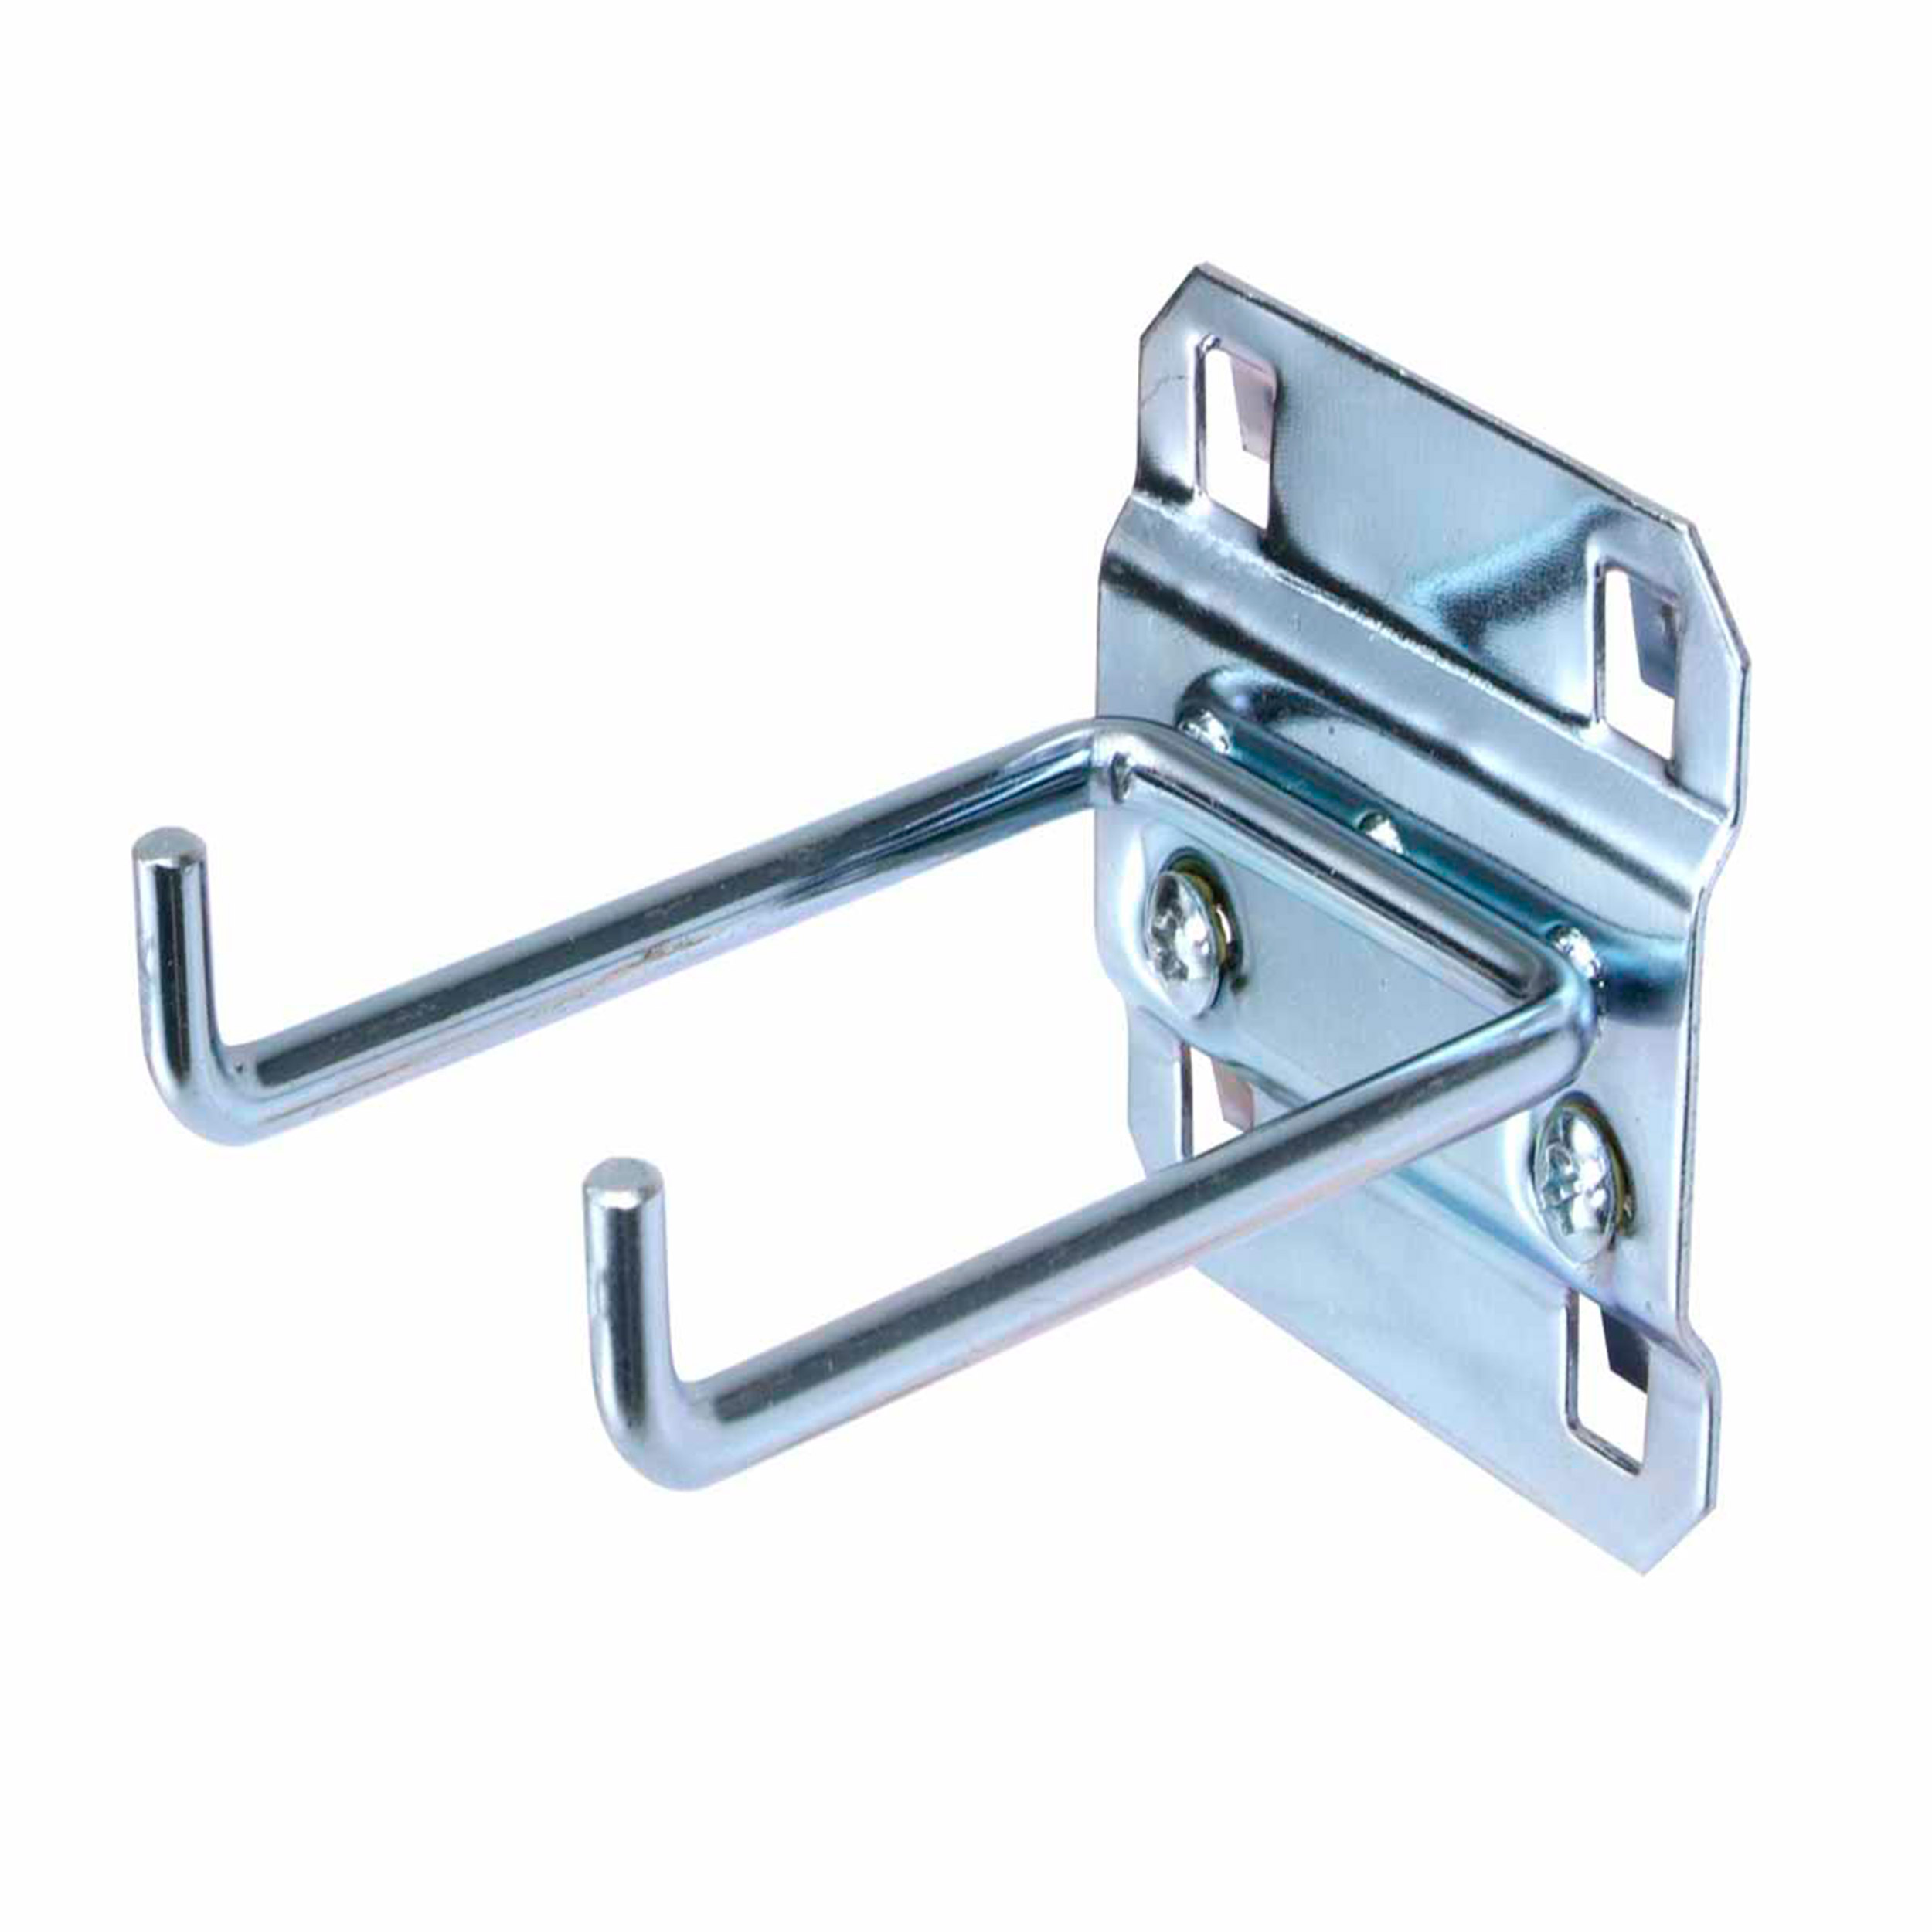 3 In. Double Rod 90 Degree Bend 3/16 In. Dia. Zinc Plated Steel Pegboard Hook For Locboard, 5 Pack